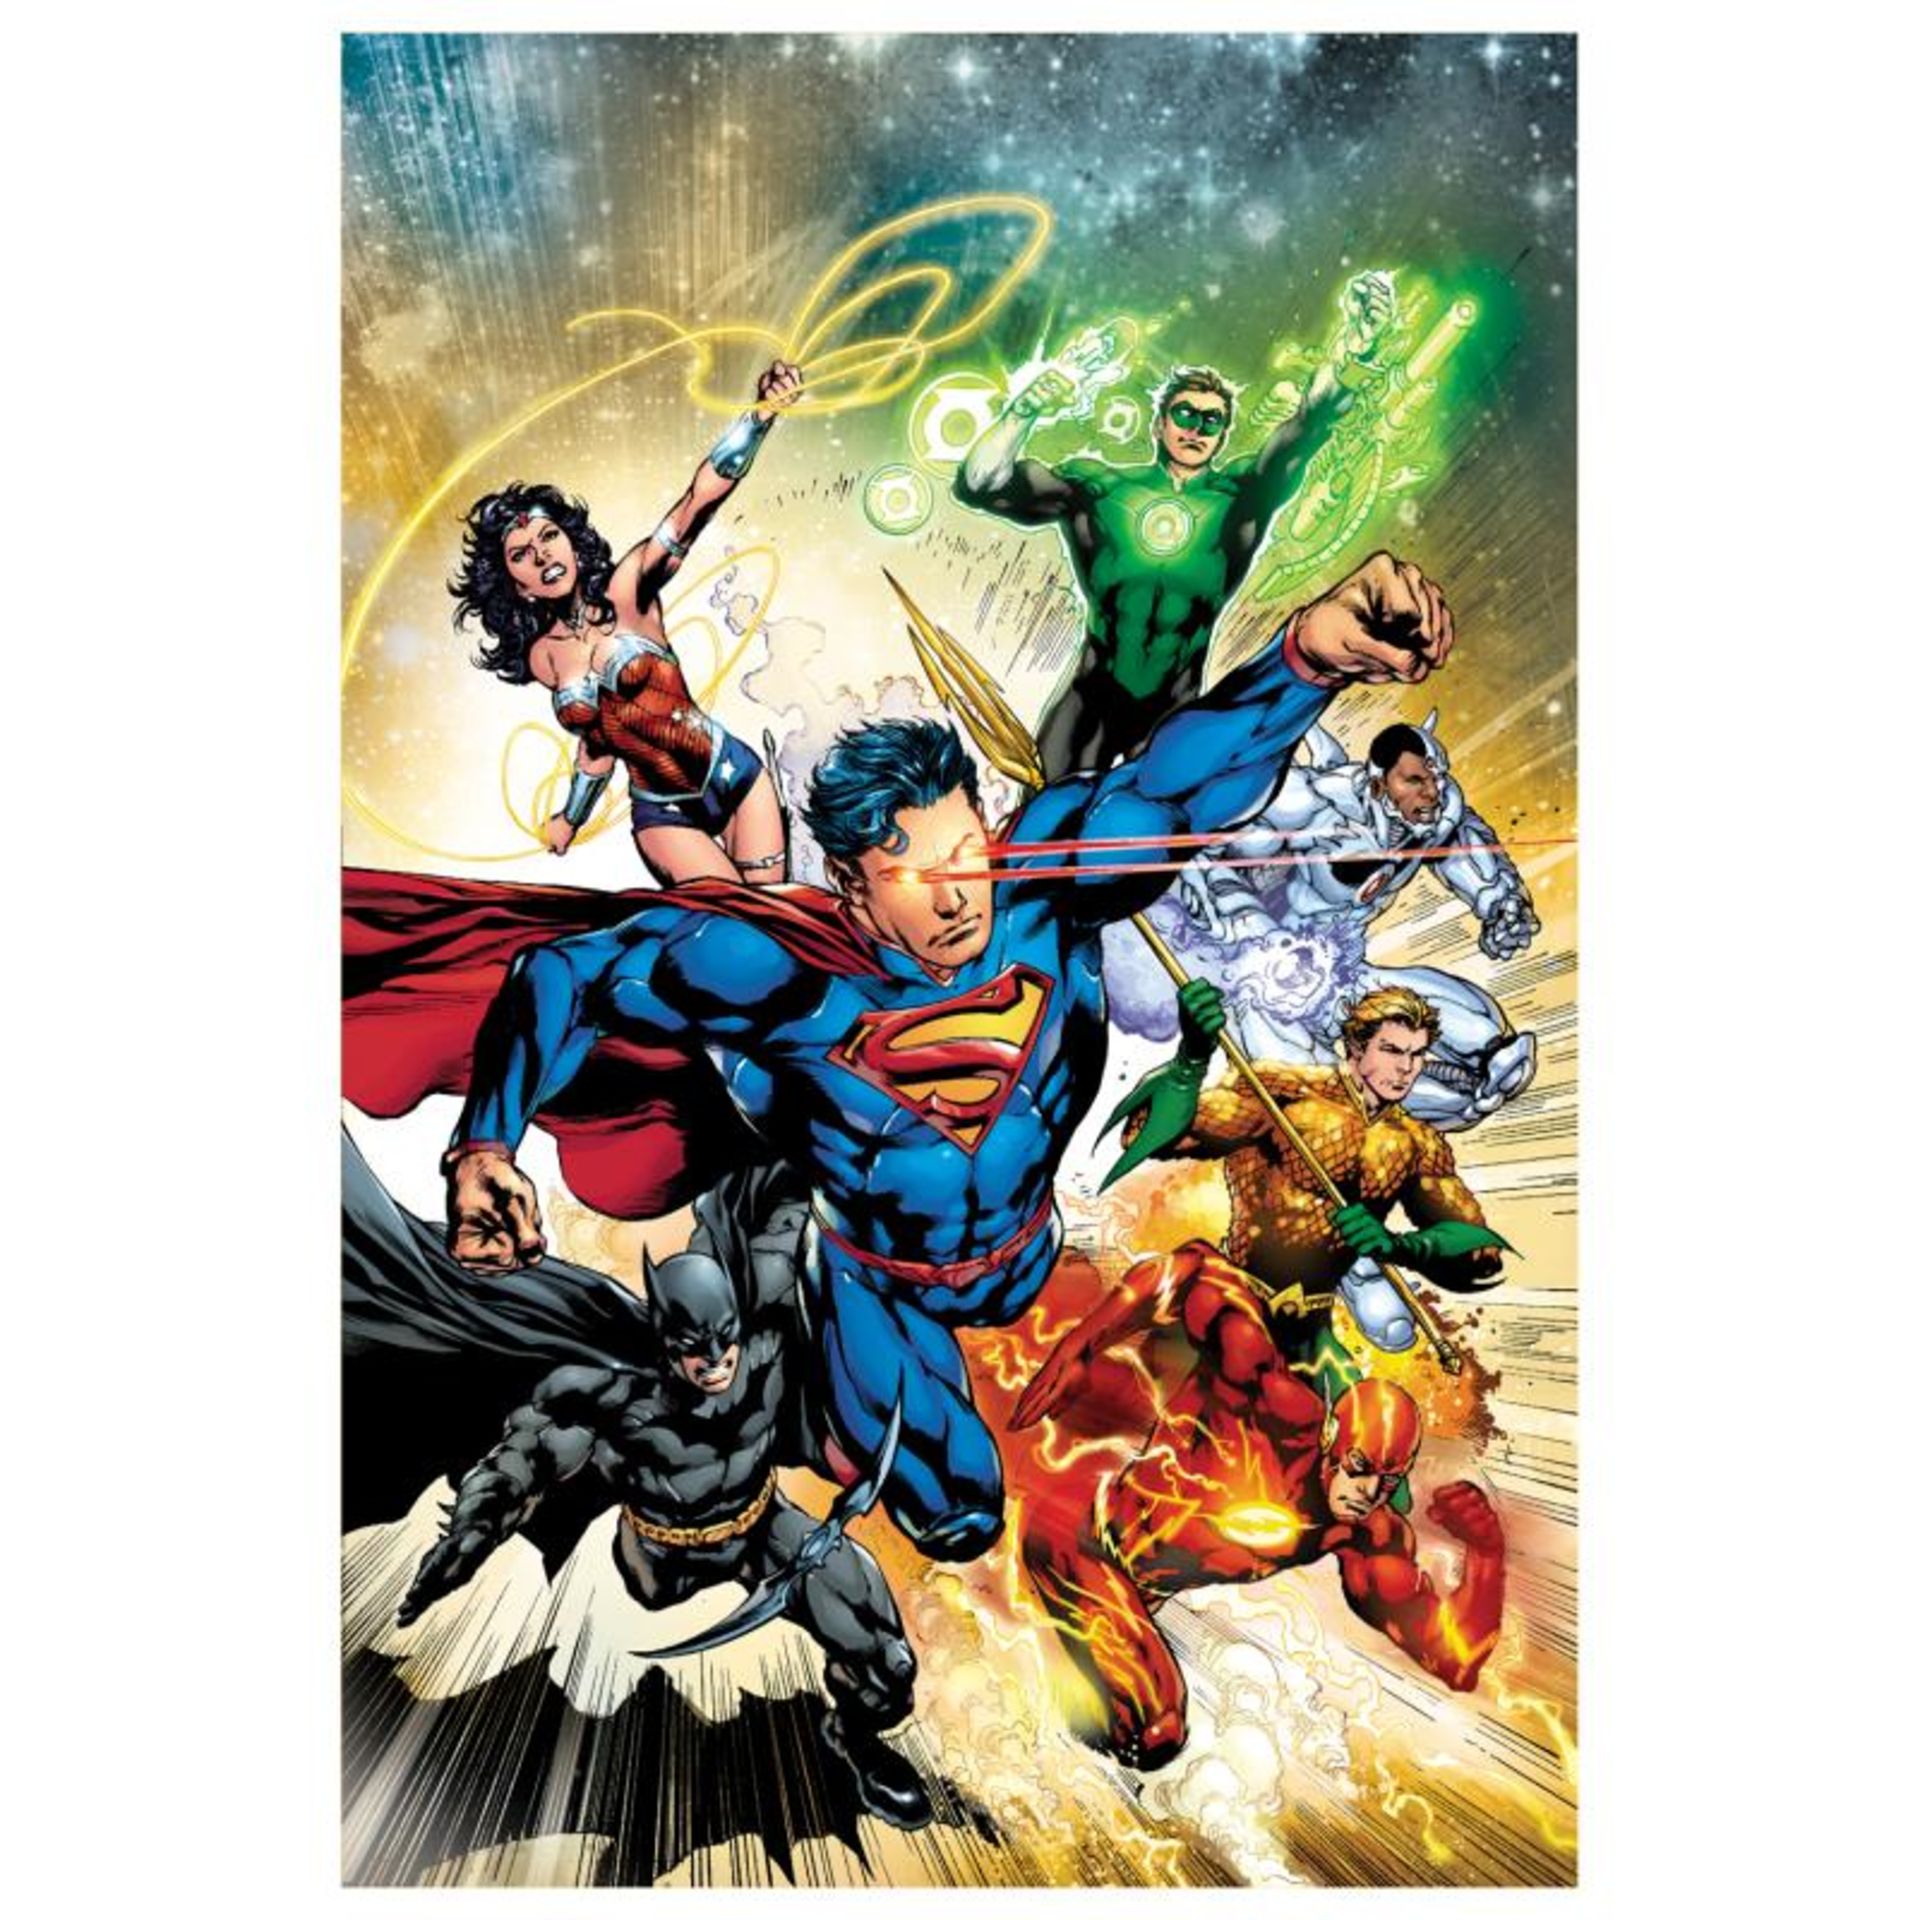 DC Comics, "Justice League #2" Numbered Limited Edition Giclee on Canvas by Ivan